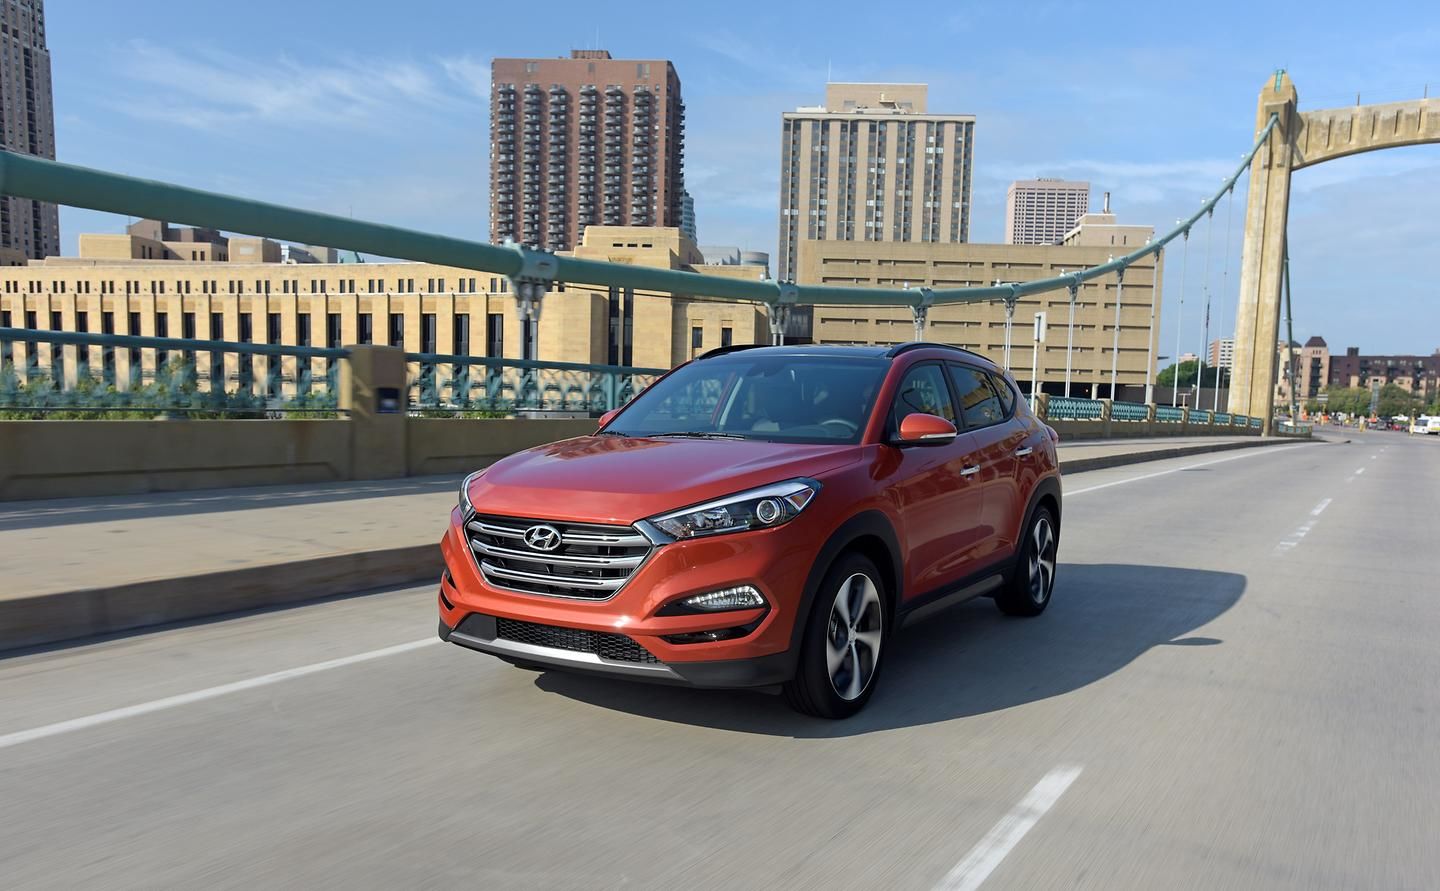 Hyundai Motor’s Tucson Honored As International Family Vehicle Of The Year By Road & Travel Magazine